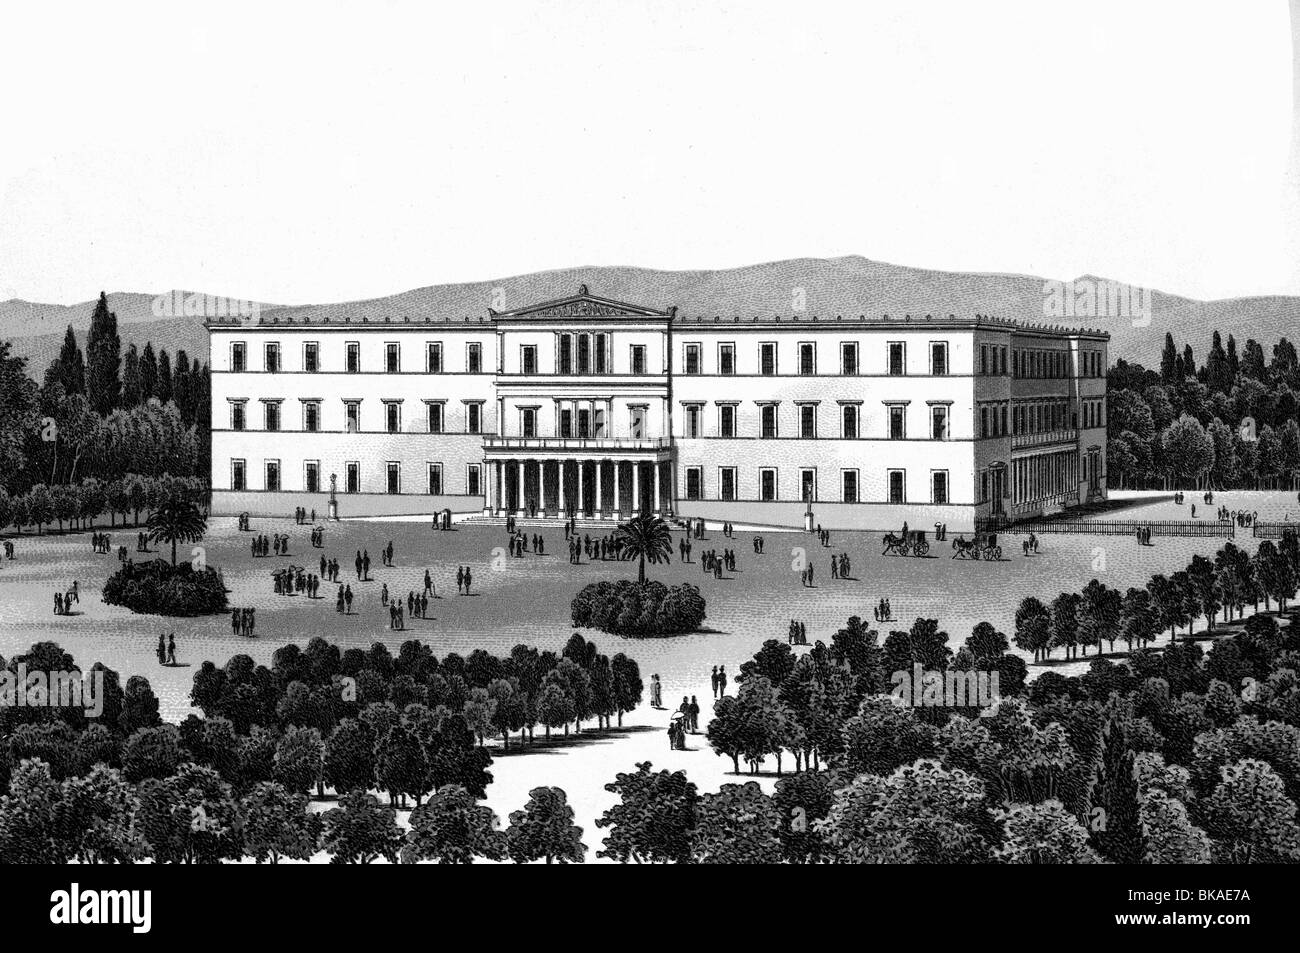 geography / travel, Greece, Athens, Royal Residence, built 1836 - 1843 by Friedrich von Gaertner, exterior view, 19th century, architecture, building, Syntagma Square, palace, Southern Europa, Balkans, historic, historical, Gartner, Gärtner, people, Stock Photo